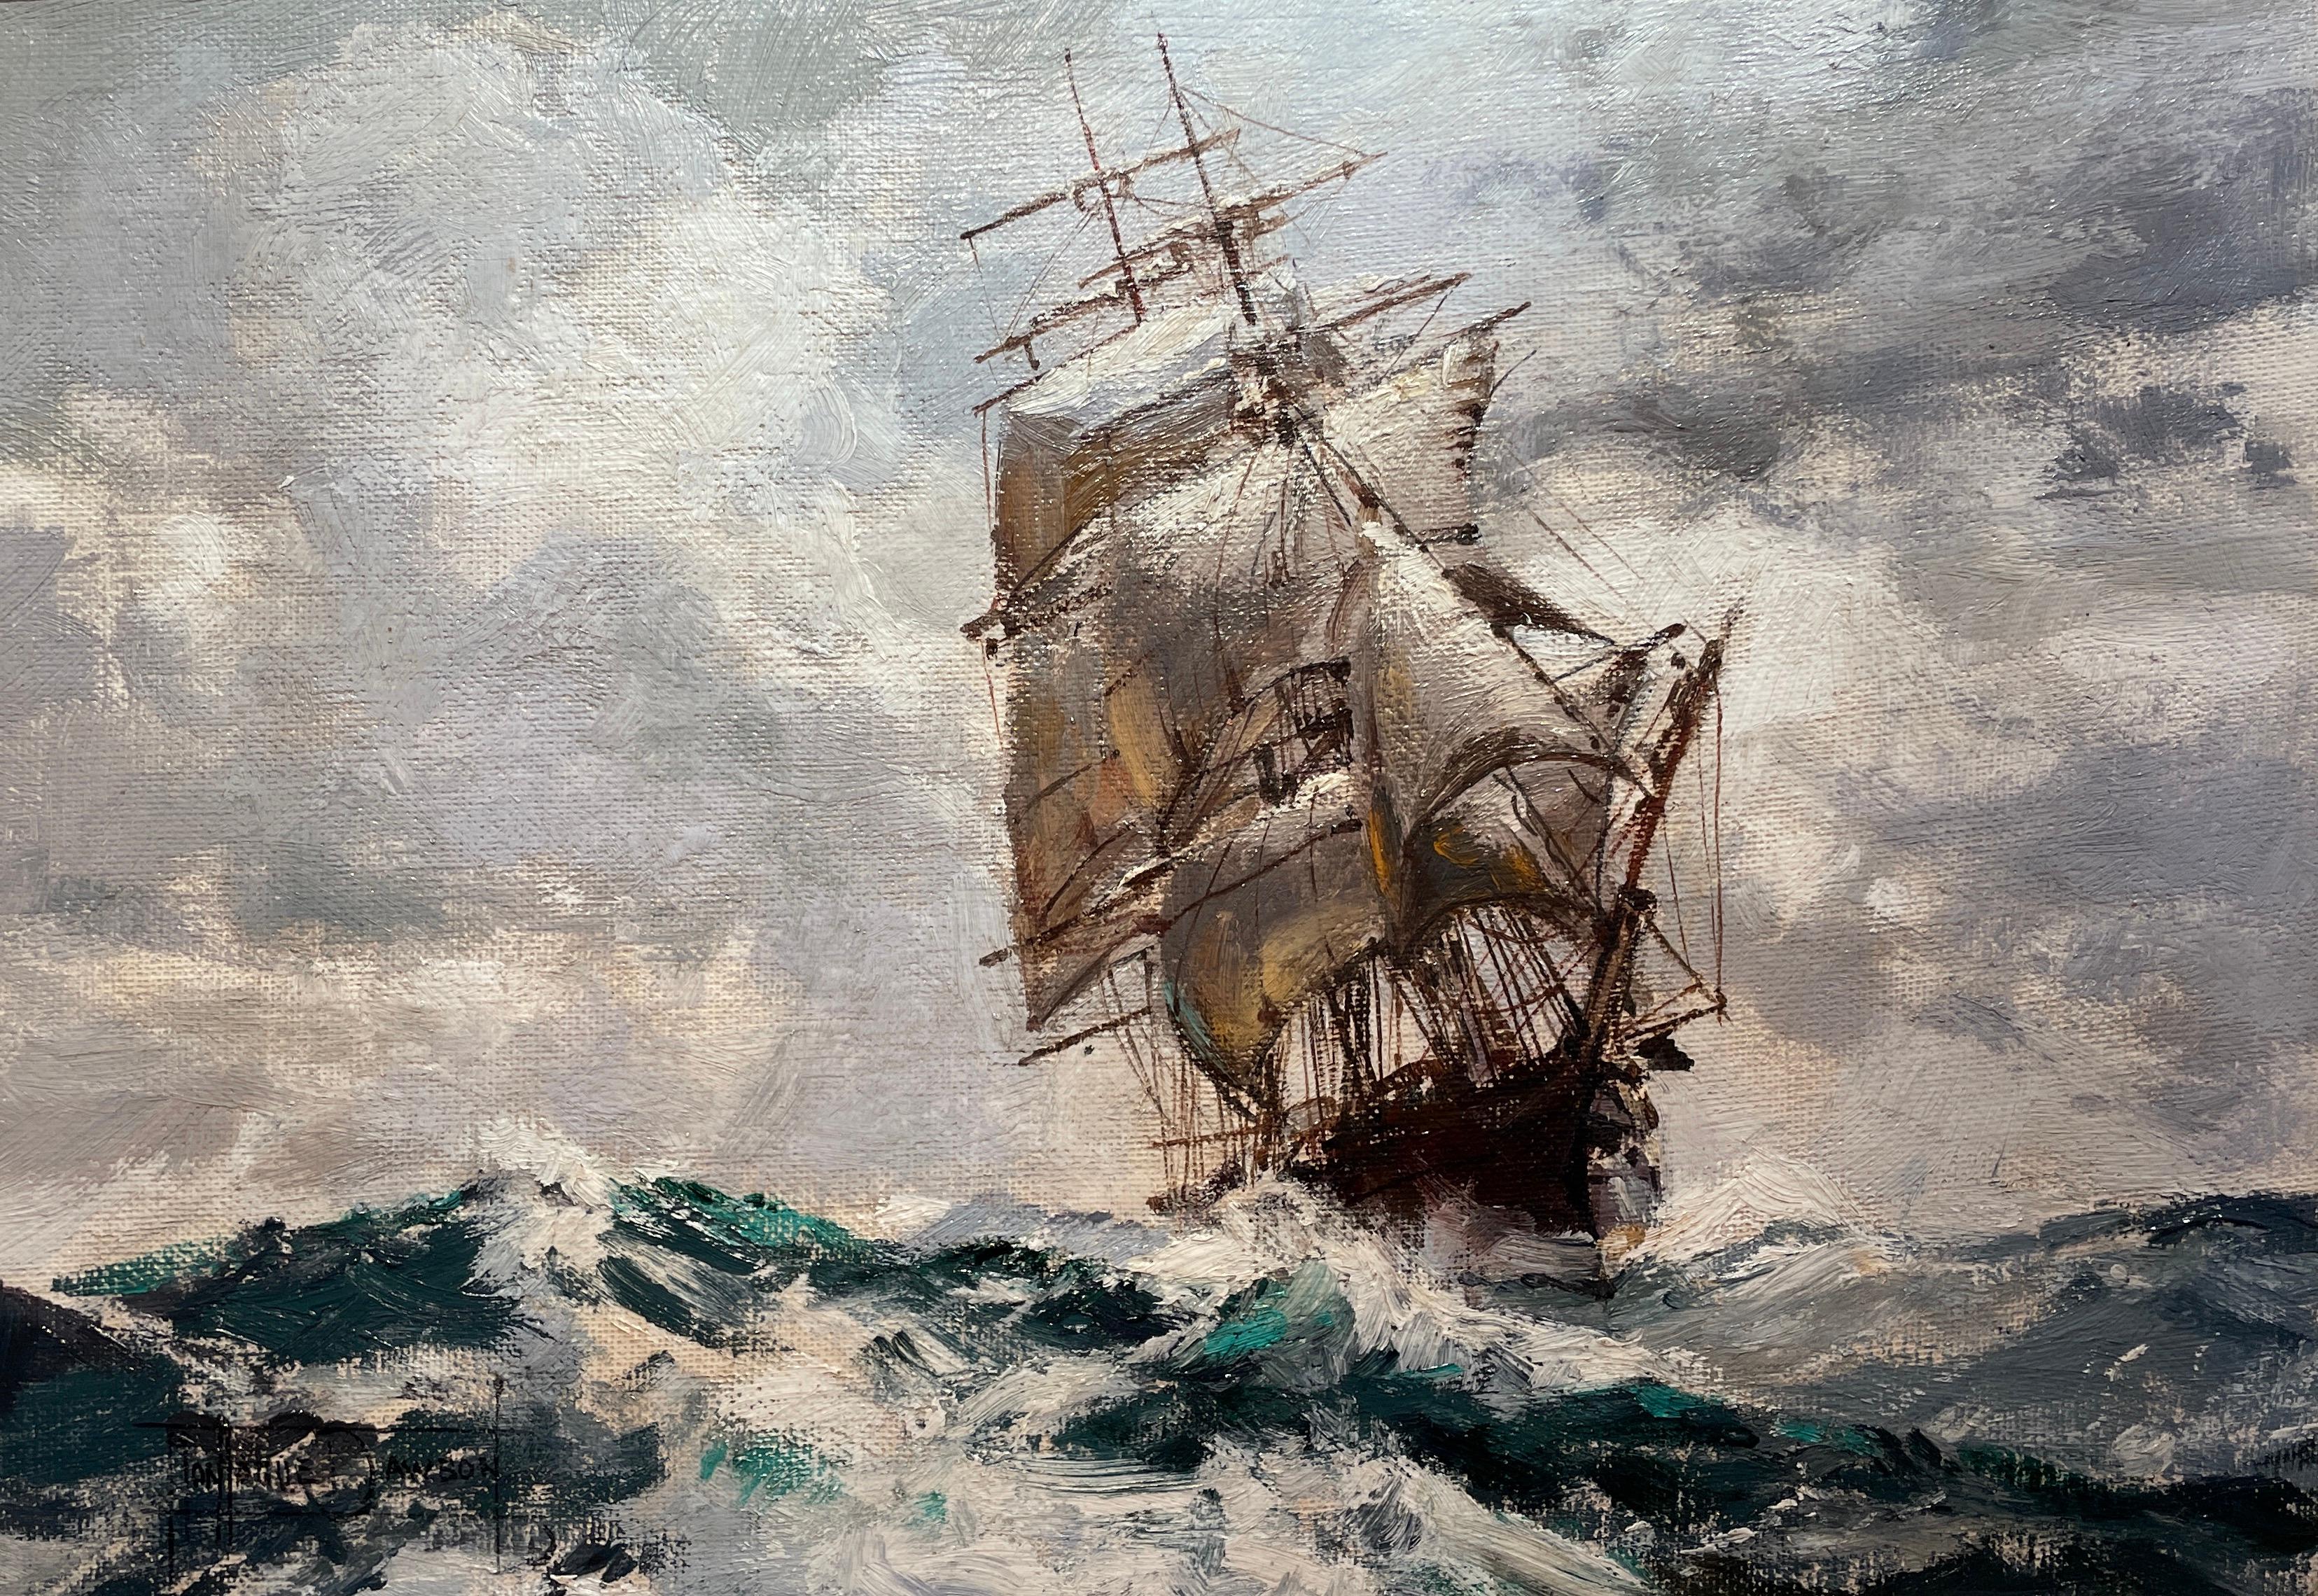 'Making a Run' 20th Century Atmospheric Seascape painting of a clipper at sea - Painting by Montague Dawson